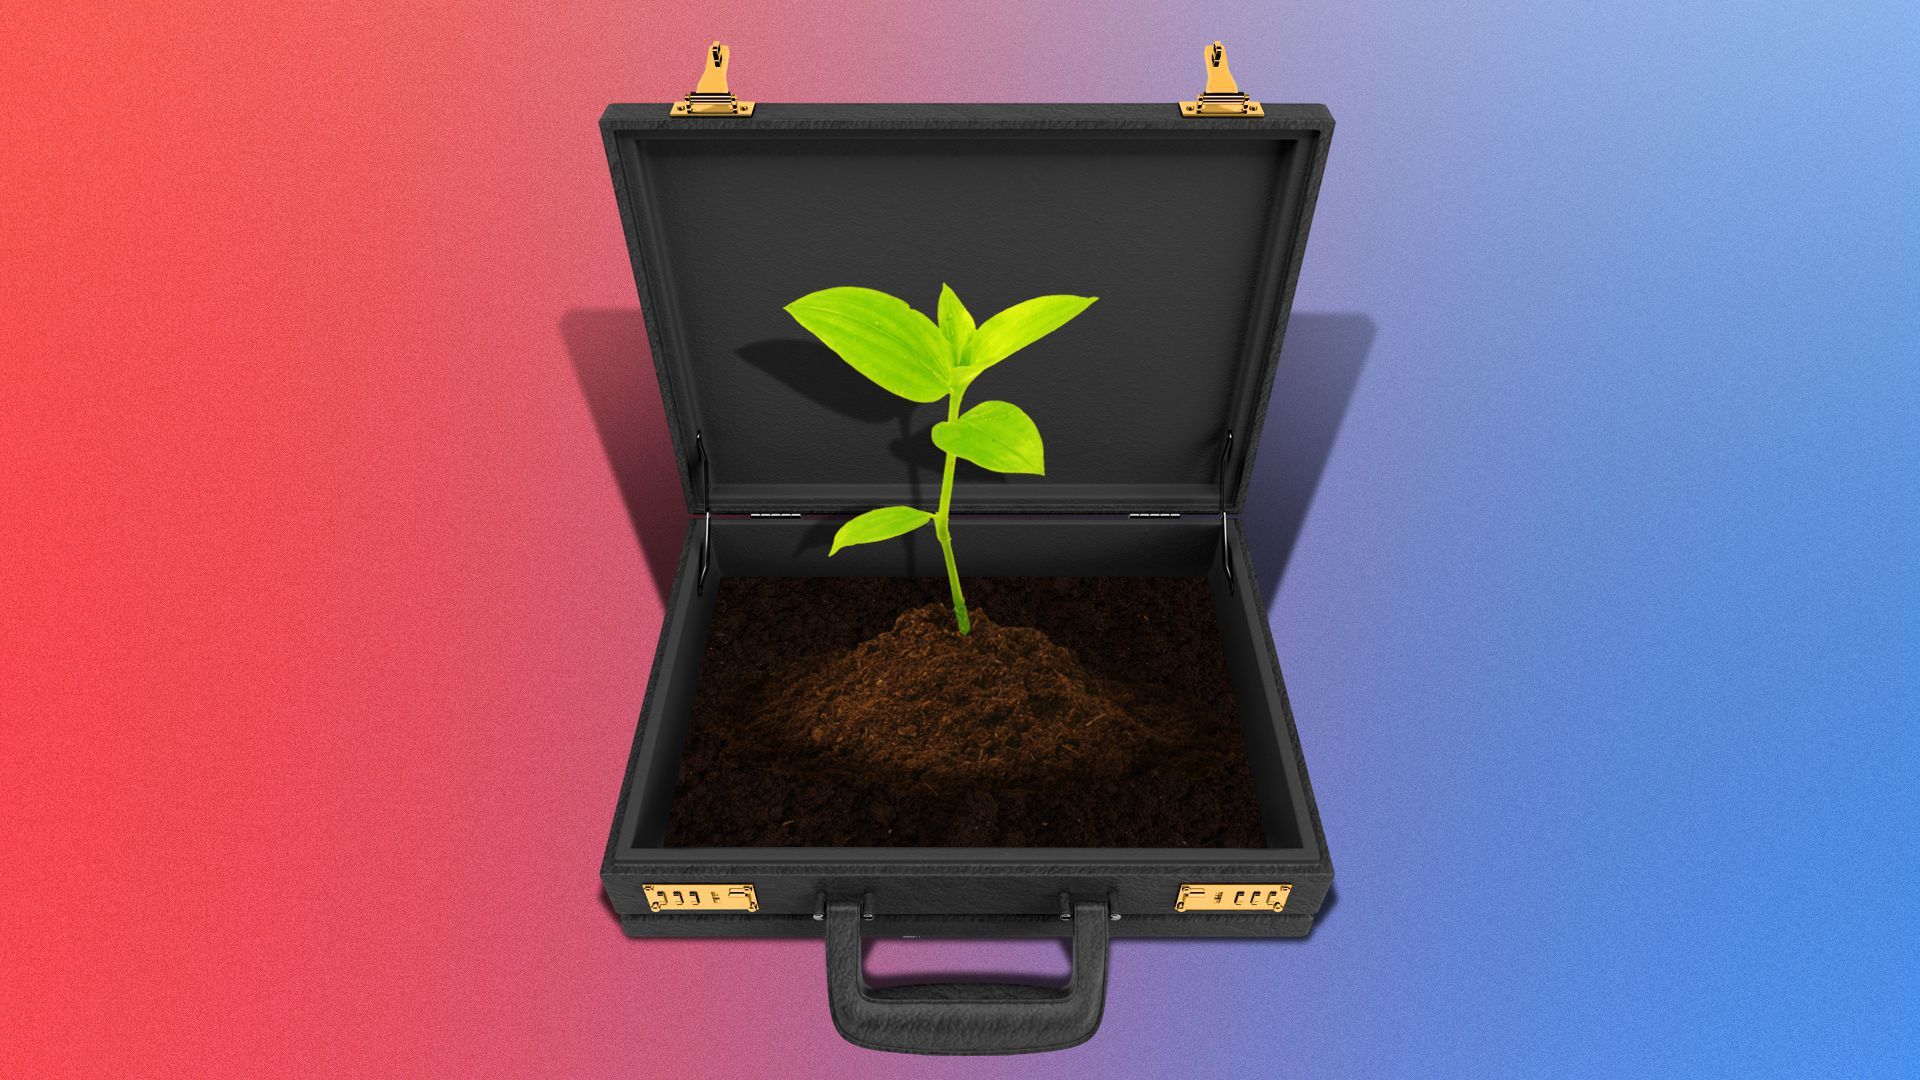 An illustration of a suitcase with a plan growing out of it